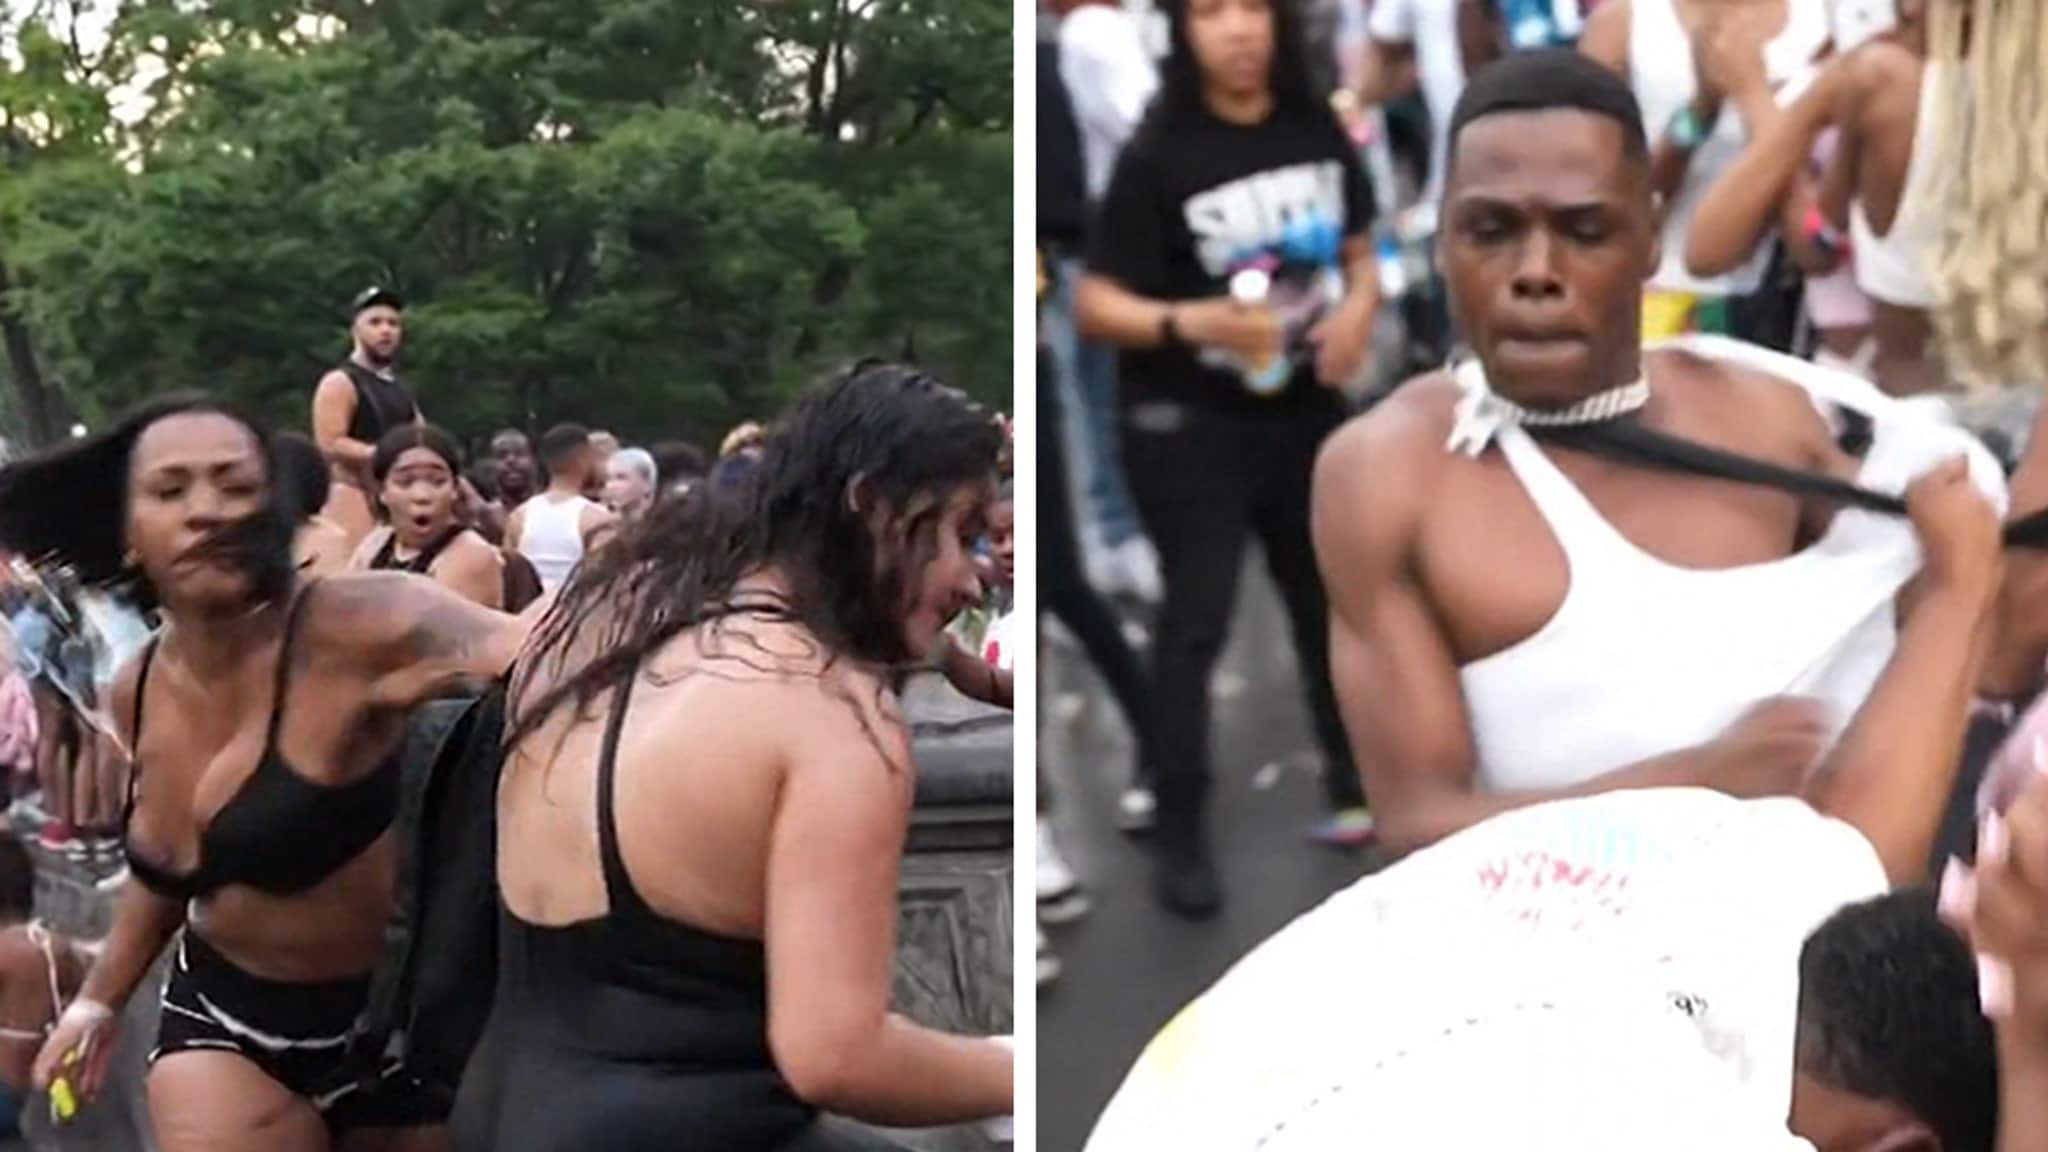 NYC Pride Parade Marred by Fights and Arrests